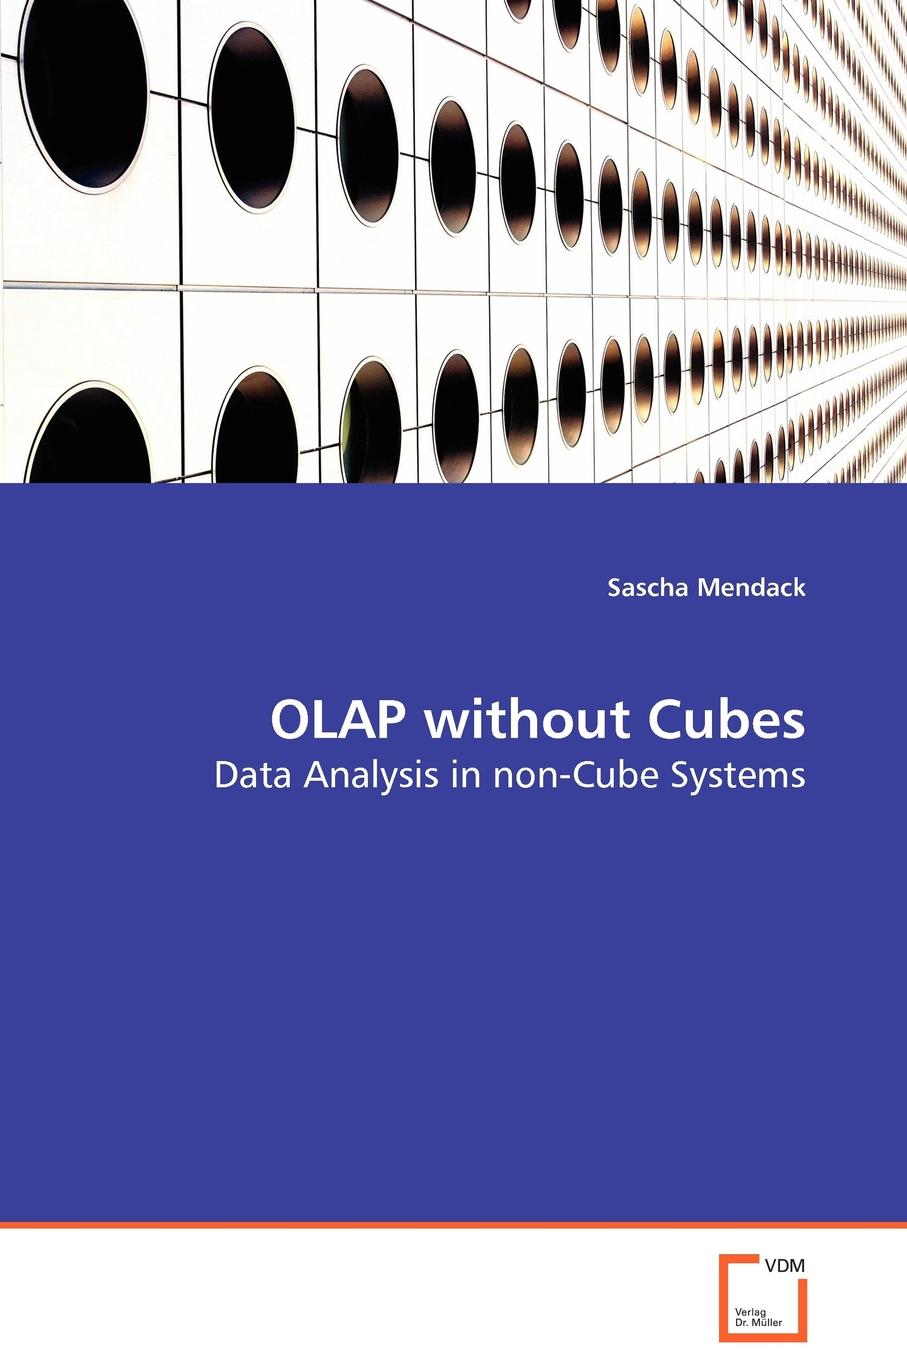 OLAP without Cubes - Data Analysis in non-Cube Systems